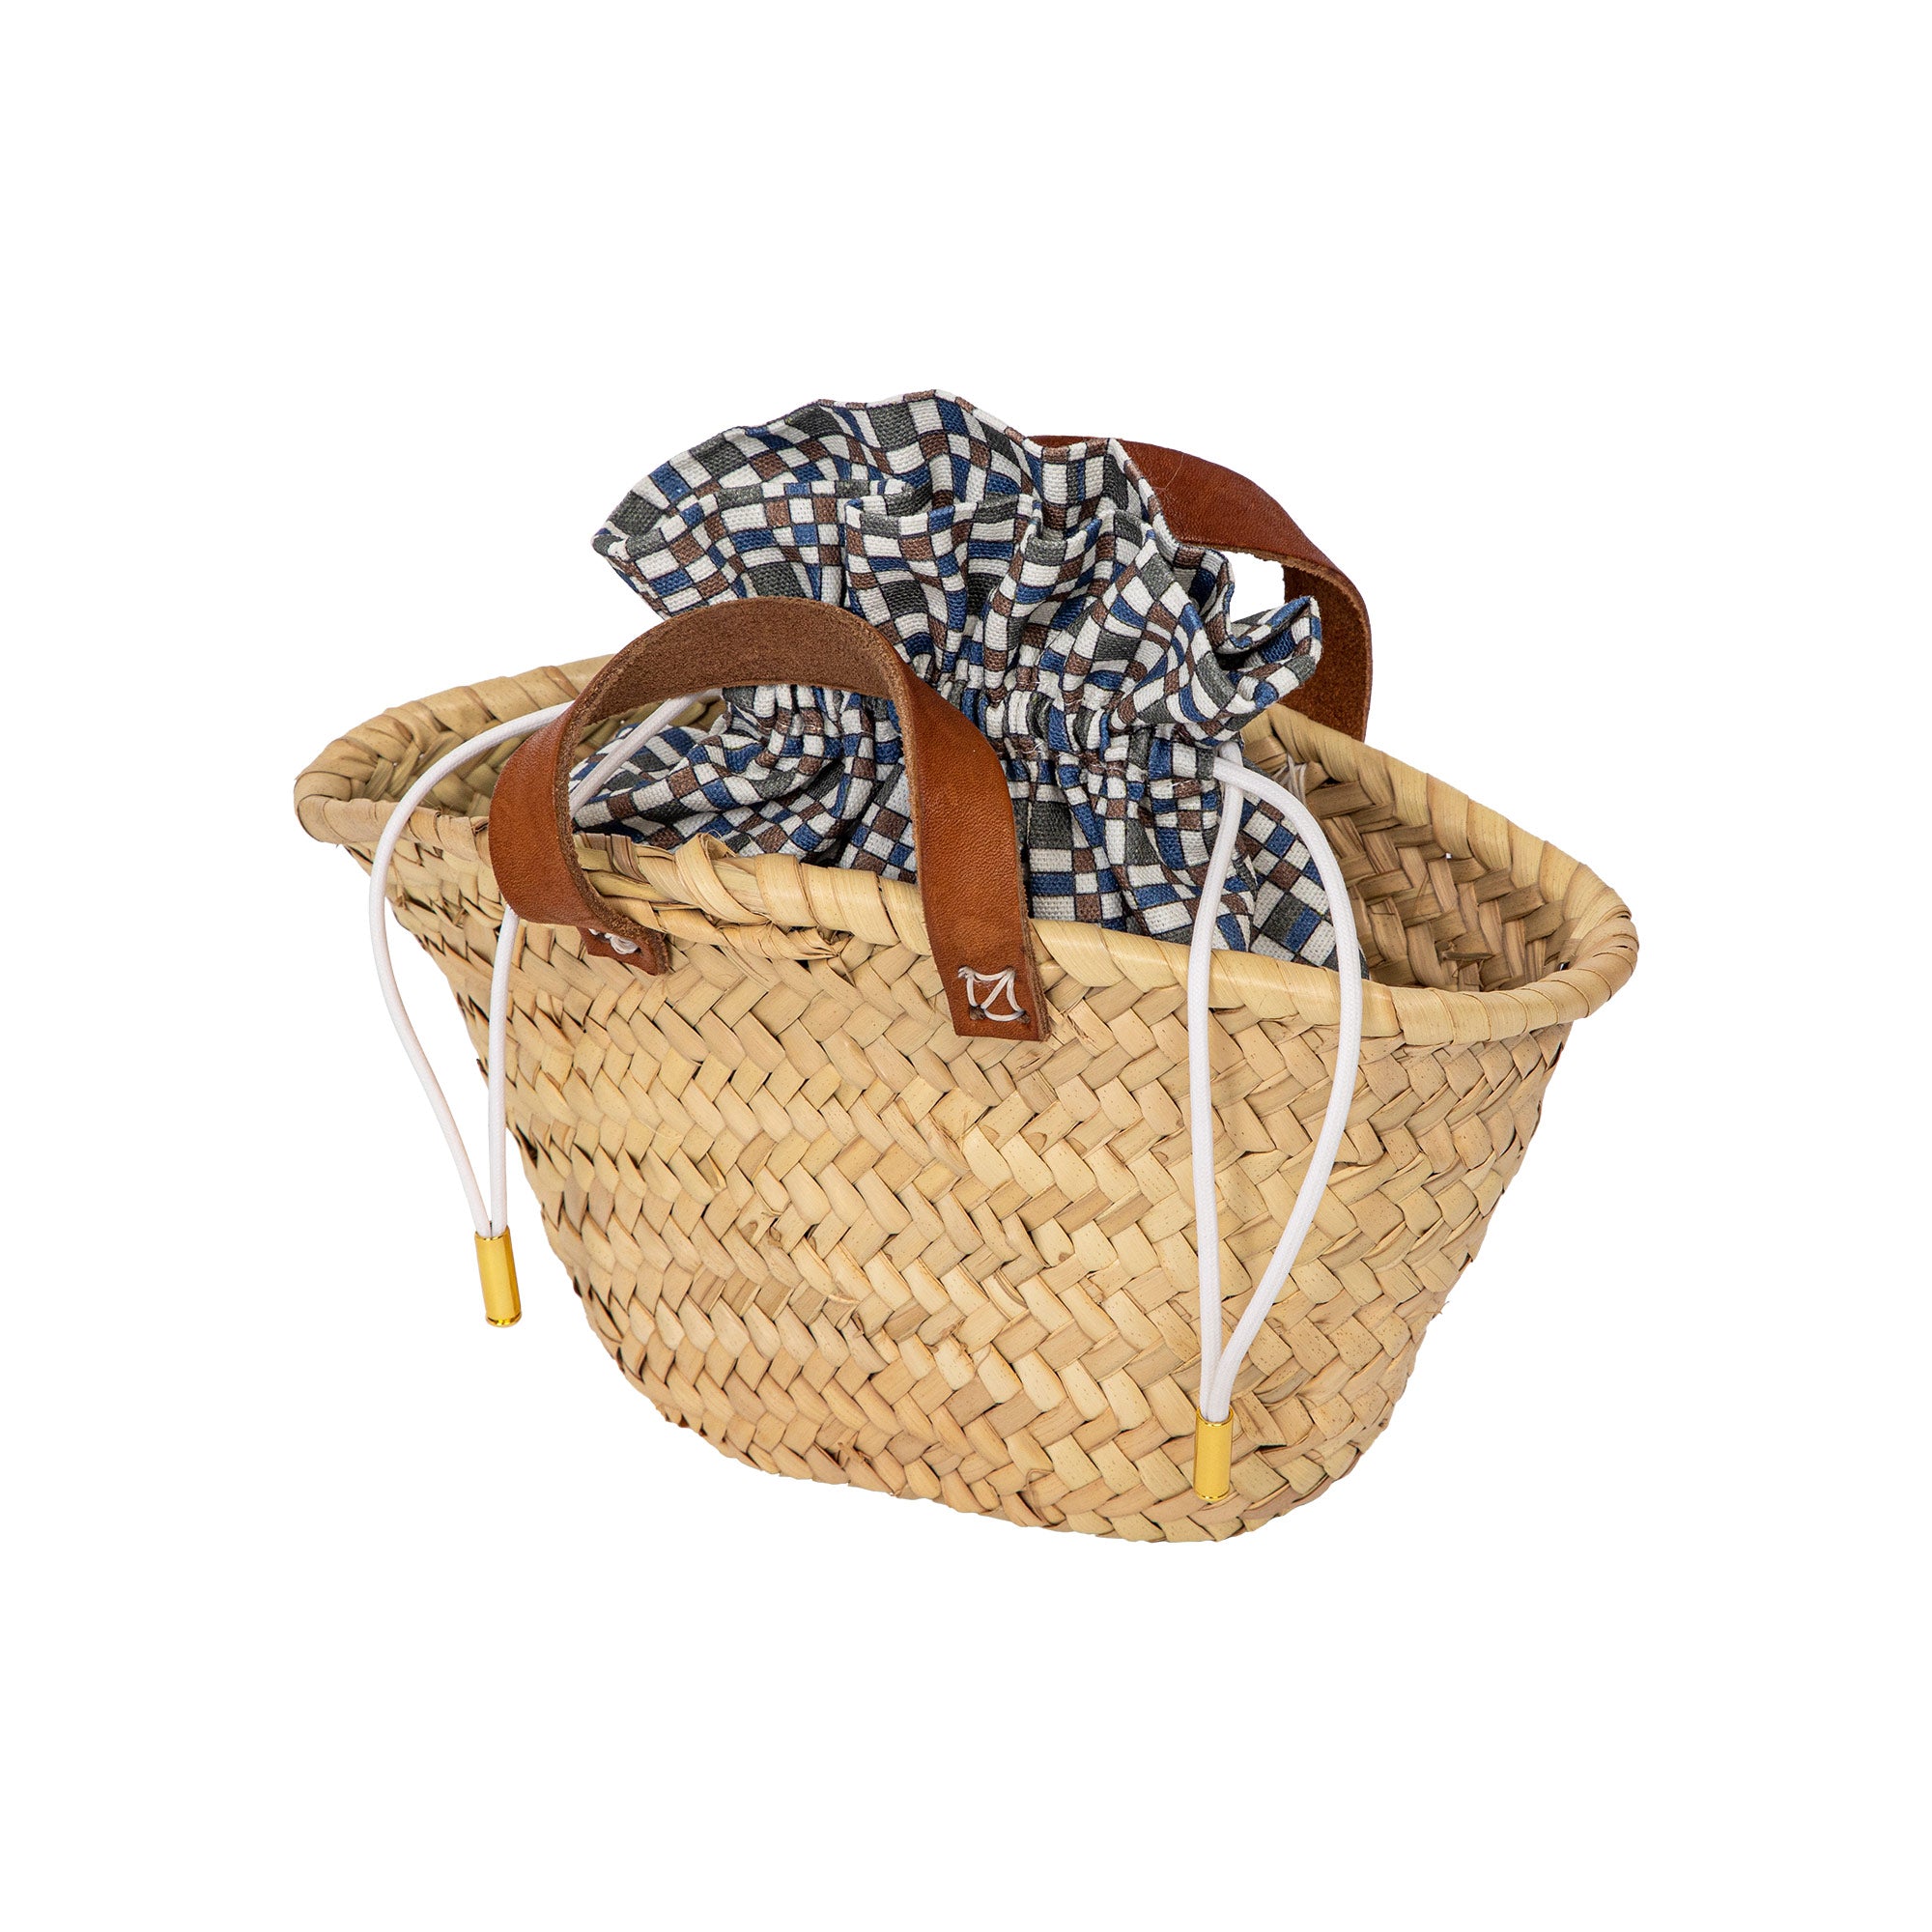 Choix x Coco Shop cotton pouch with a tile pattern lining a Moroccan straw basket